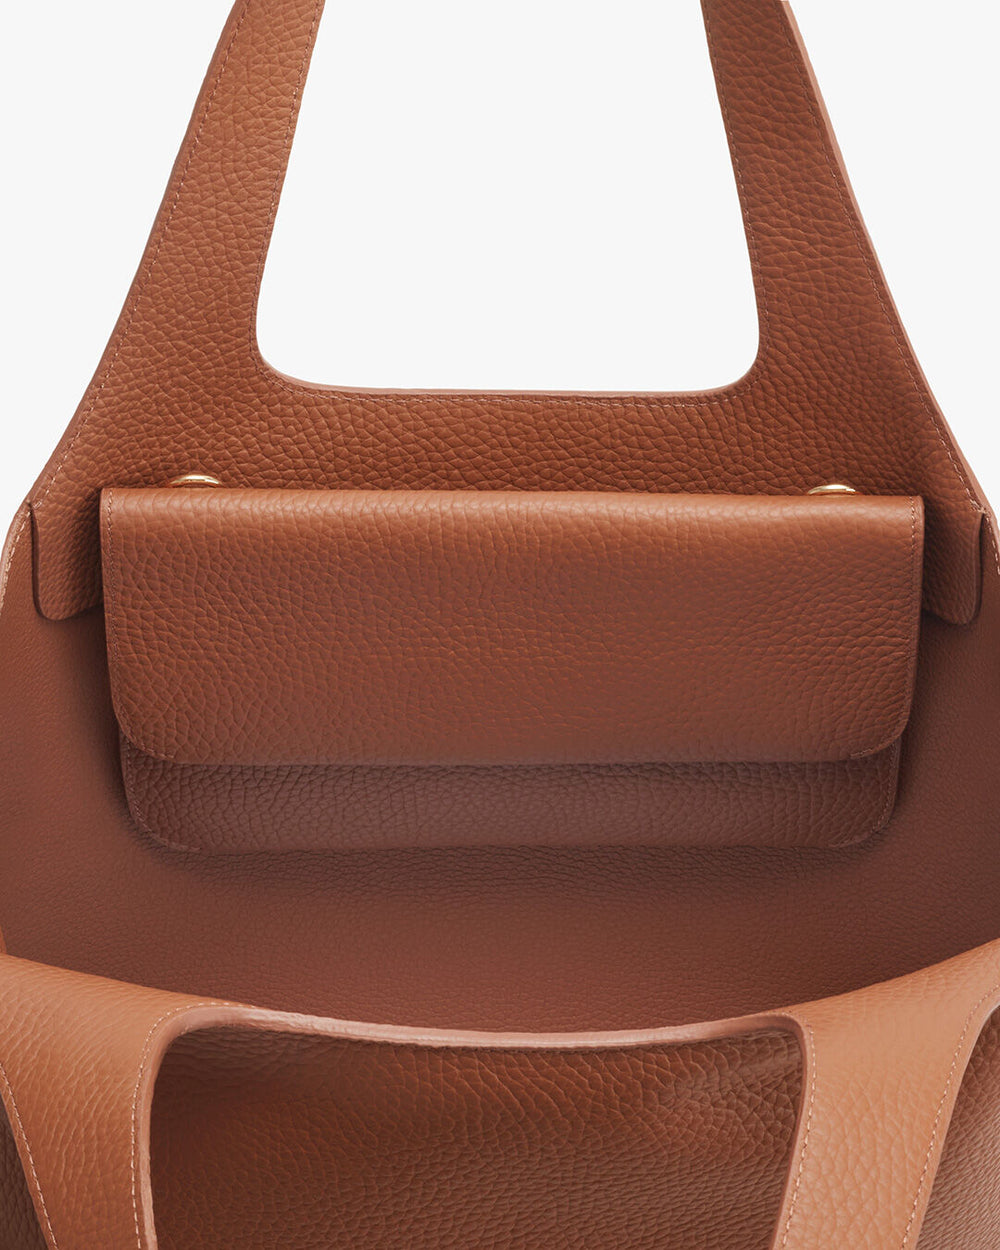 Close-up of a leather handbag with a front flap closure.